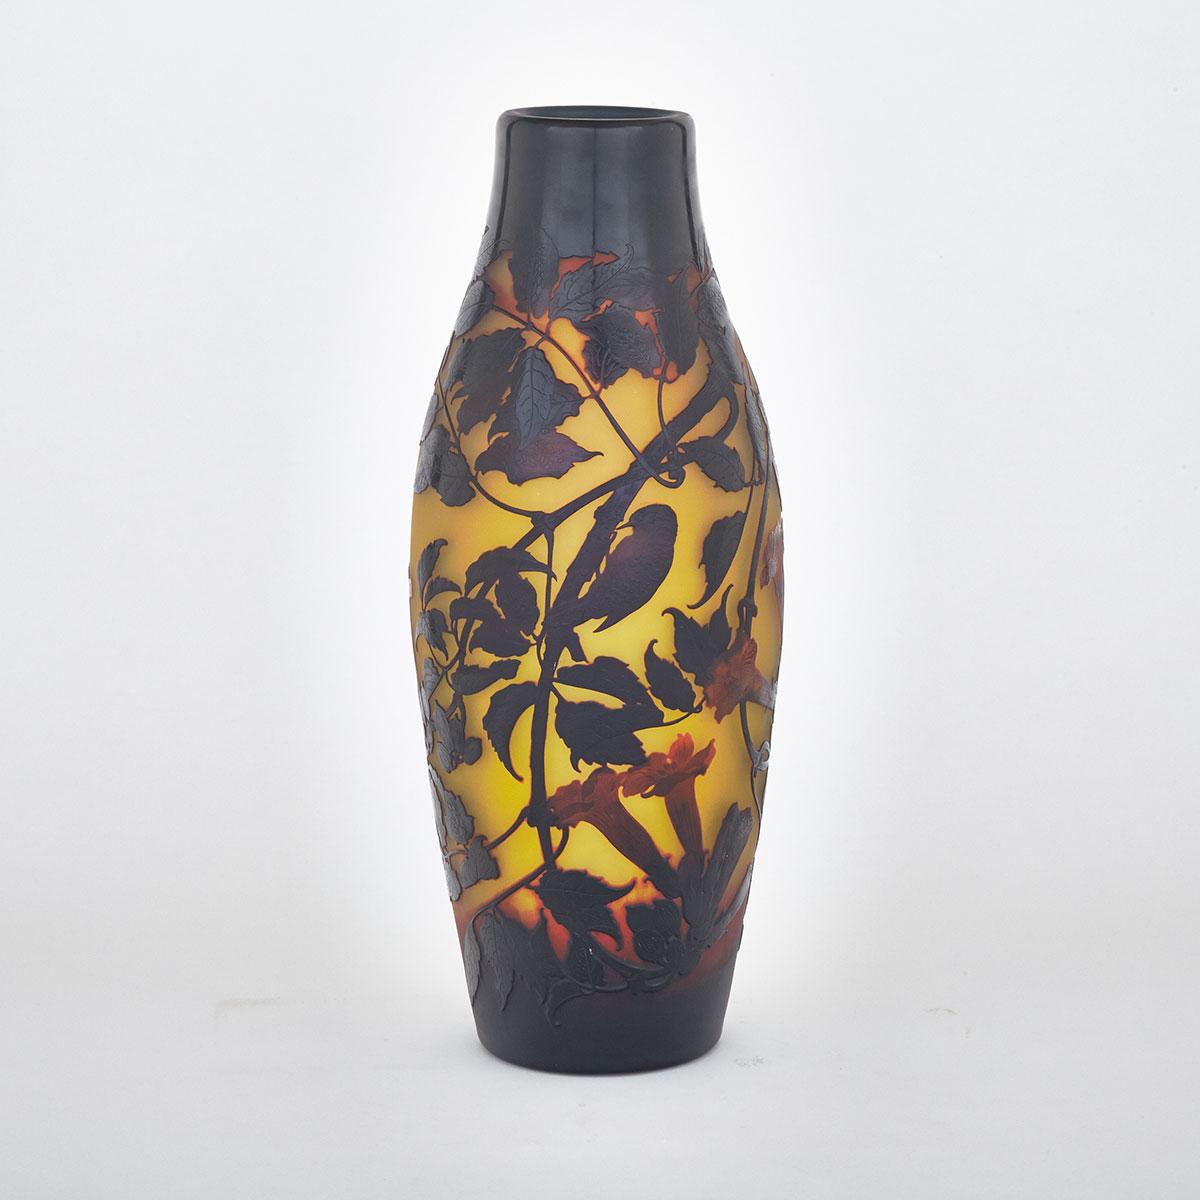 French Cameo Glass Vase, probably Paul Nicholas, c.1910